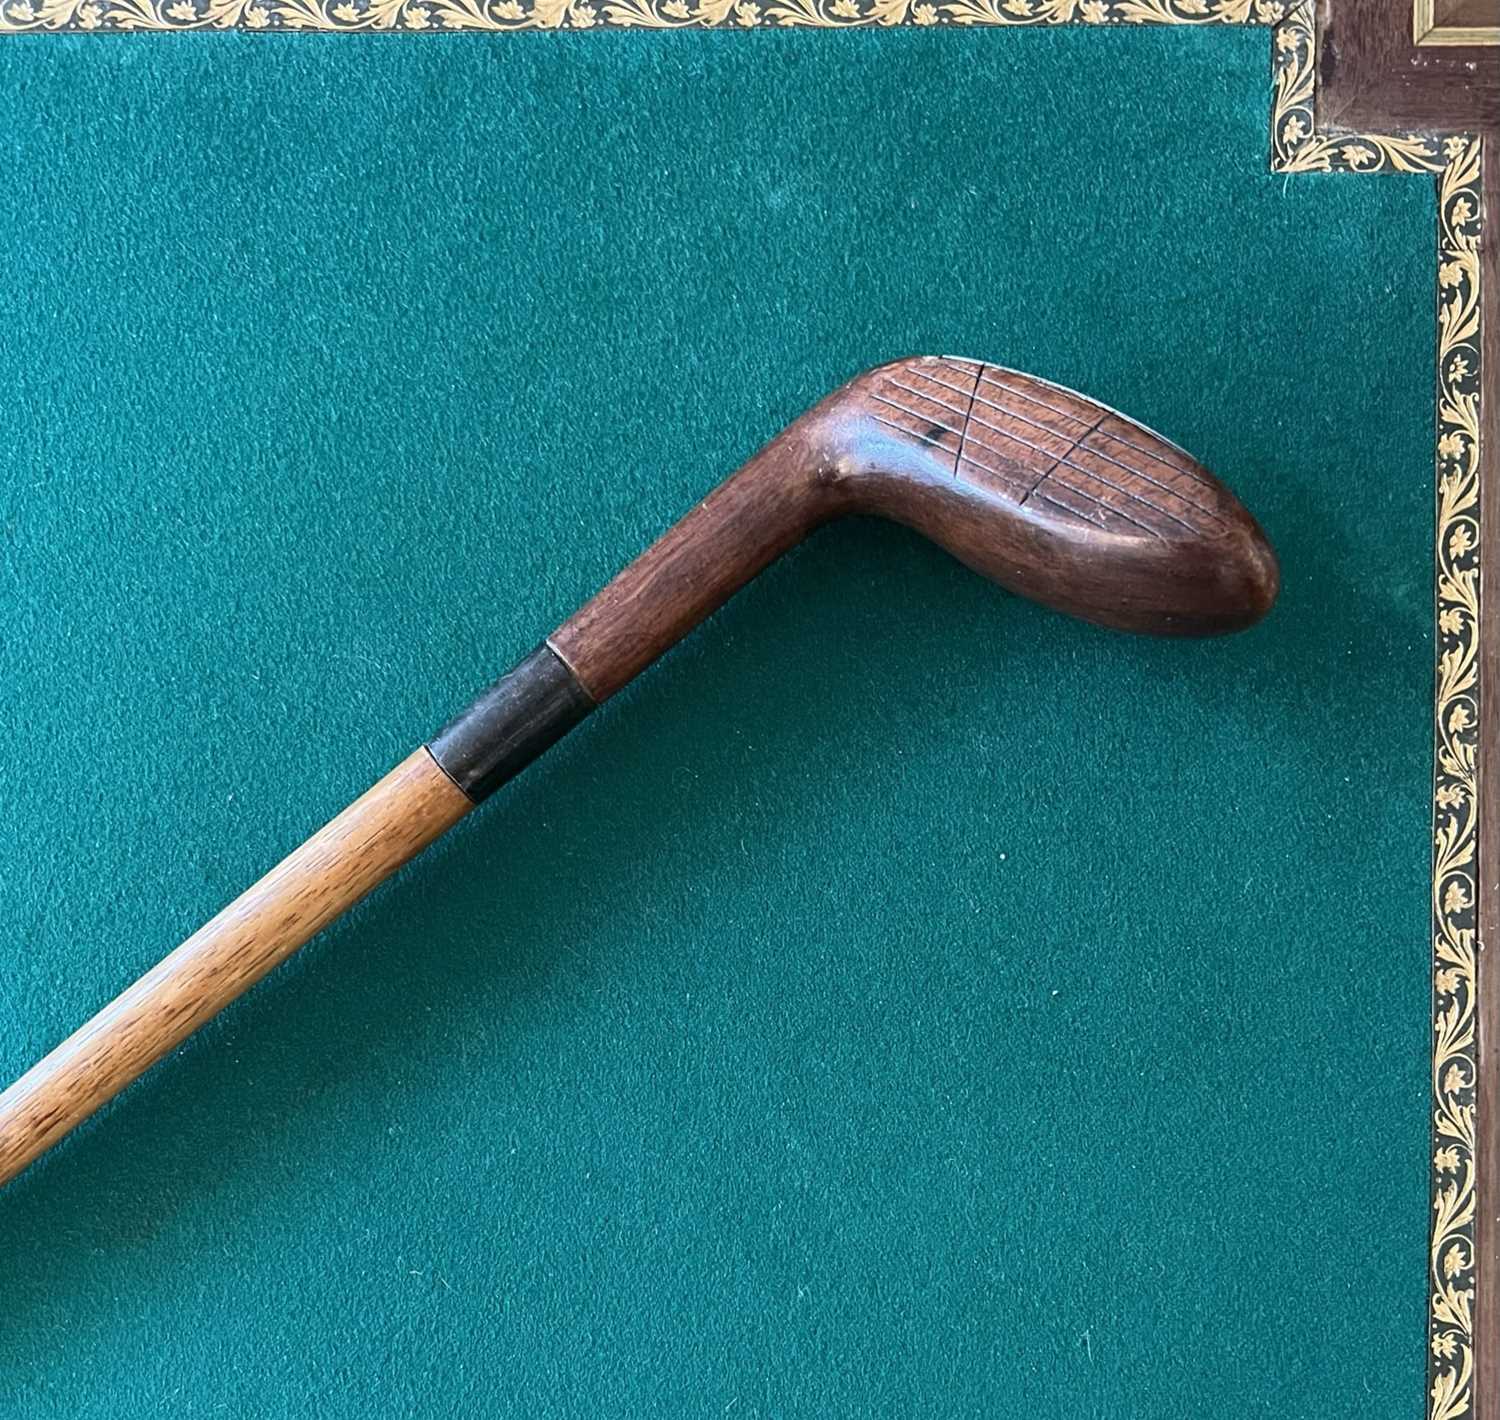 GOLFING INTEREST: A LATE 19TH / EARLY 20TH CENTURY WALKING CANE IN THE FORM OF A GOLF CLUB - Image 3 of 3